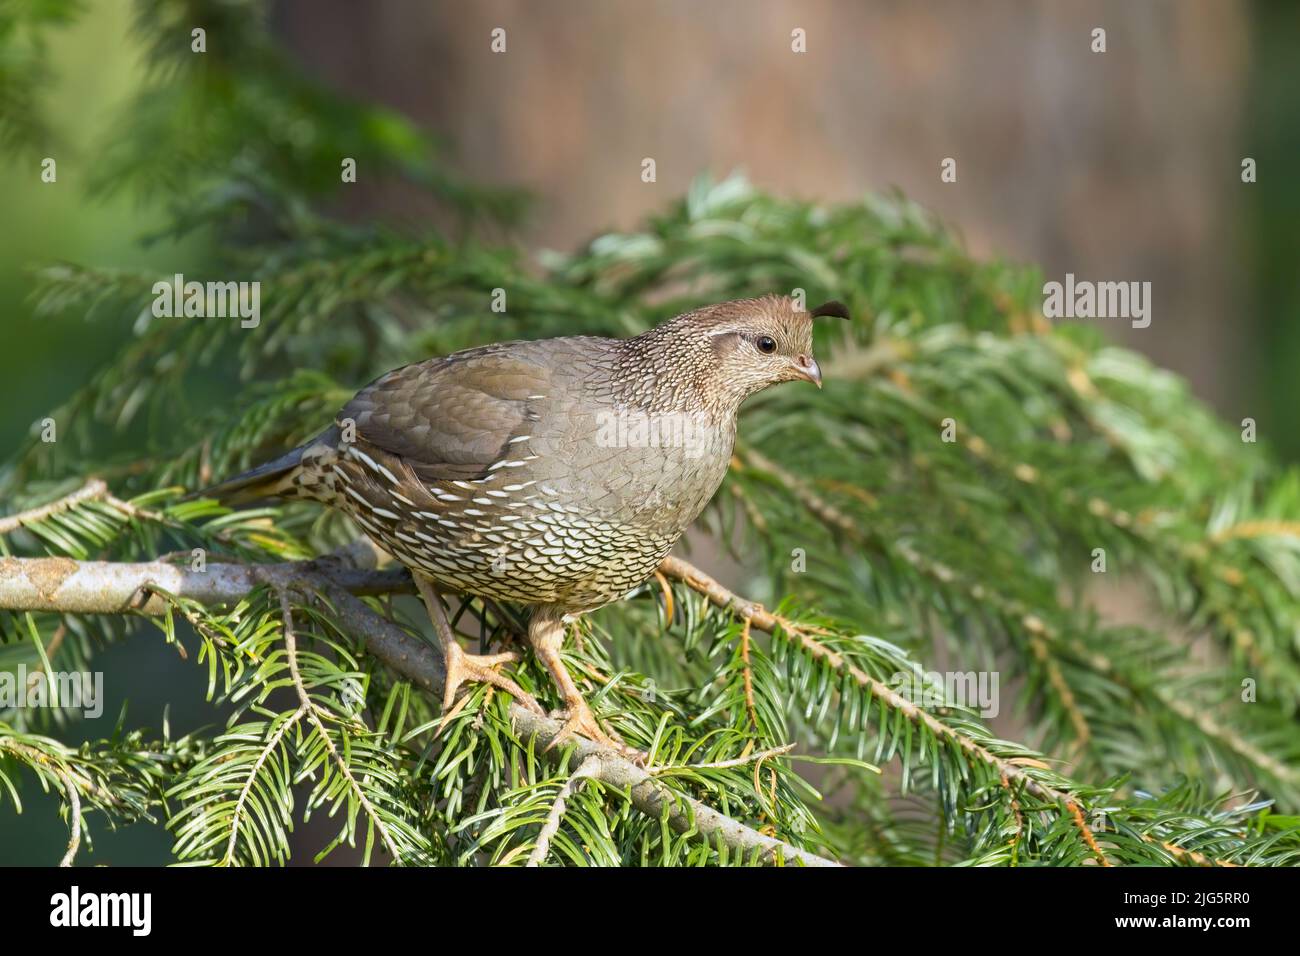 Female quail on a small pine tree branch in Rathdrum, Idaho. Stock Photo